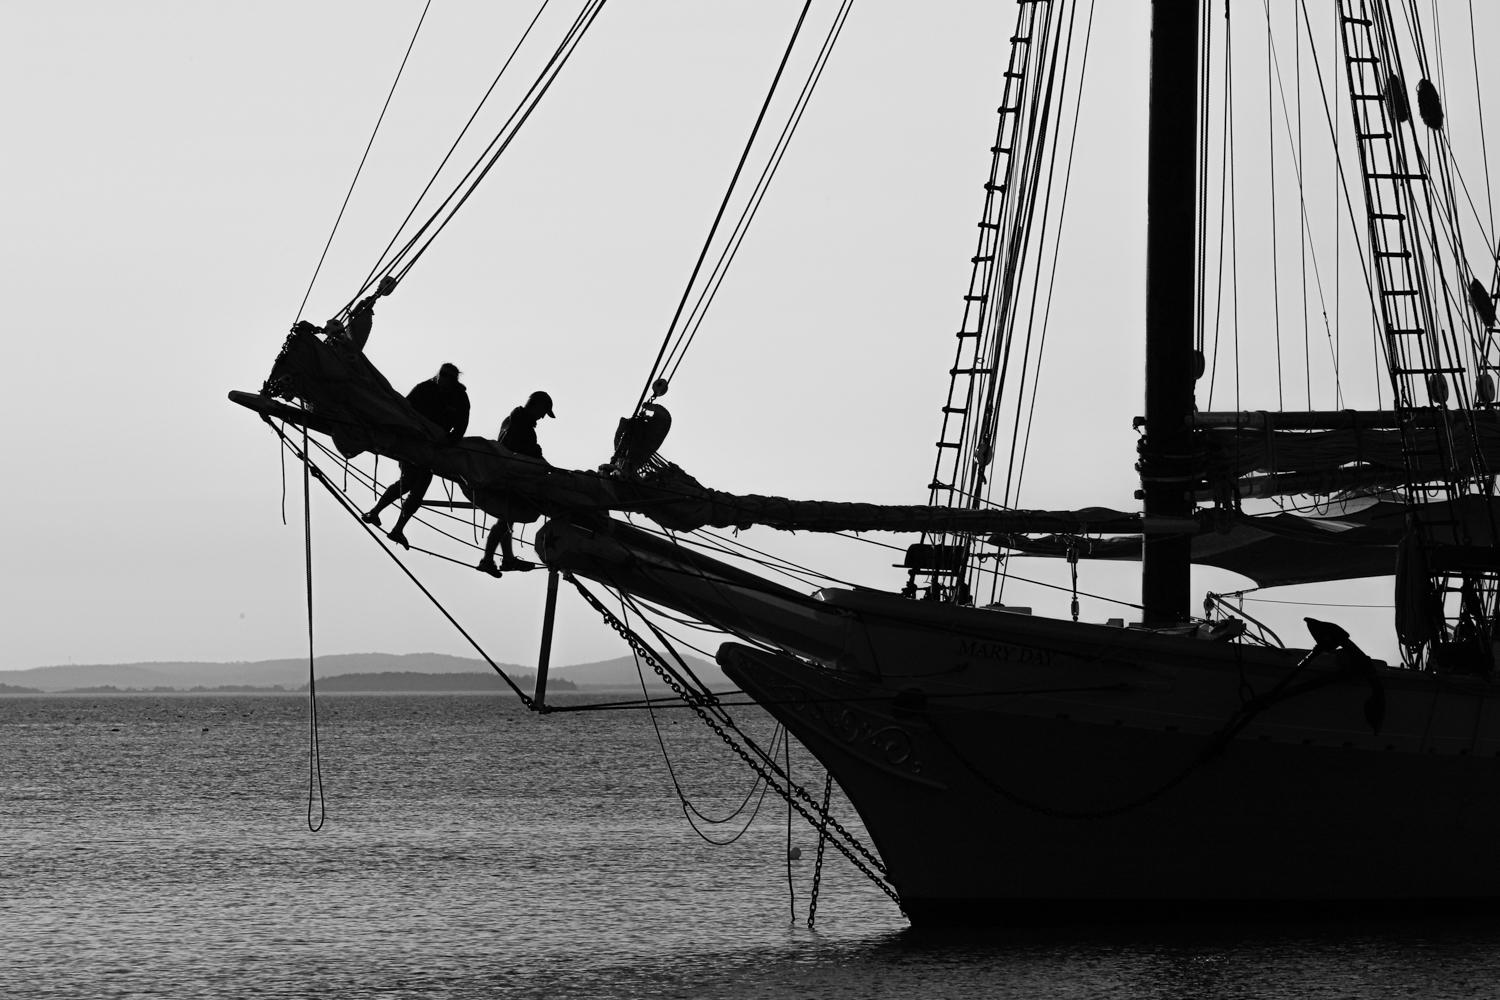 19th century sailing aboard Schooner Mary Day.